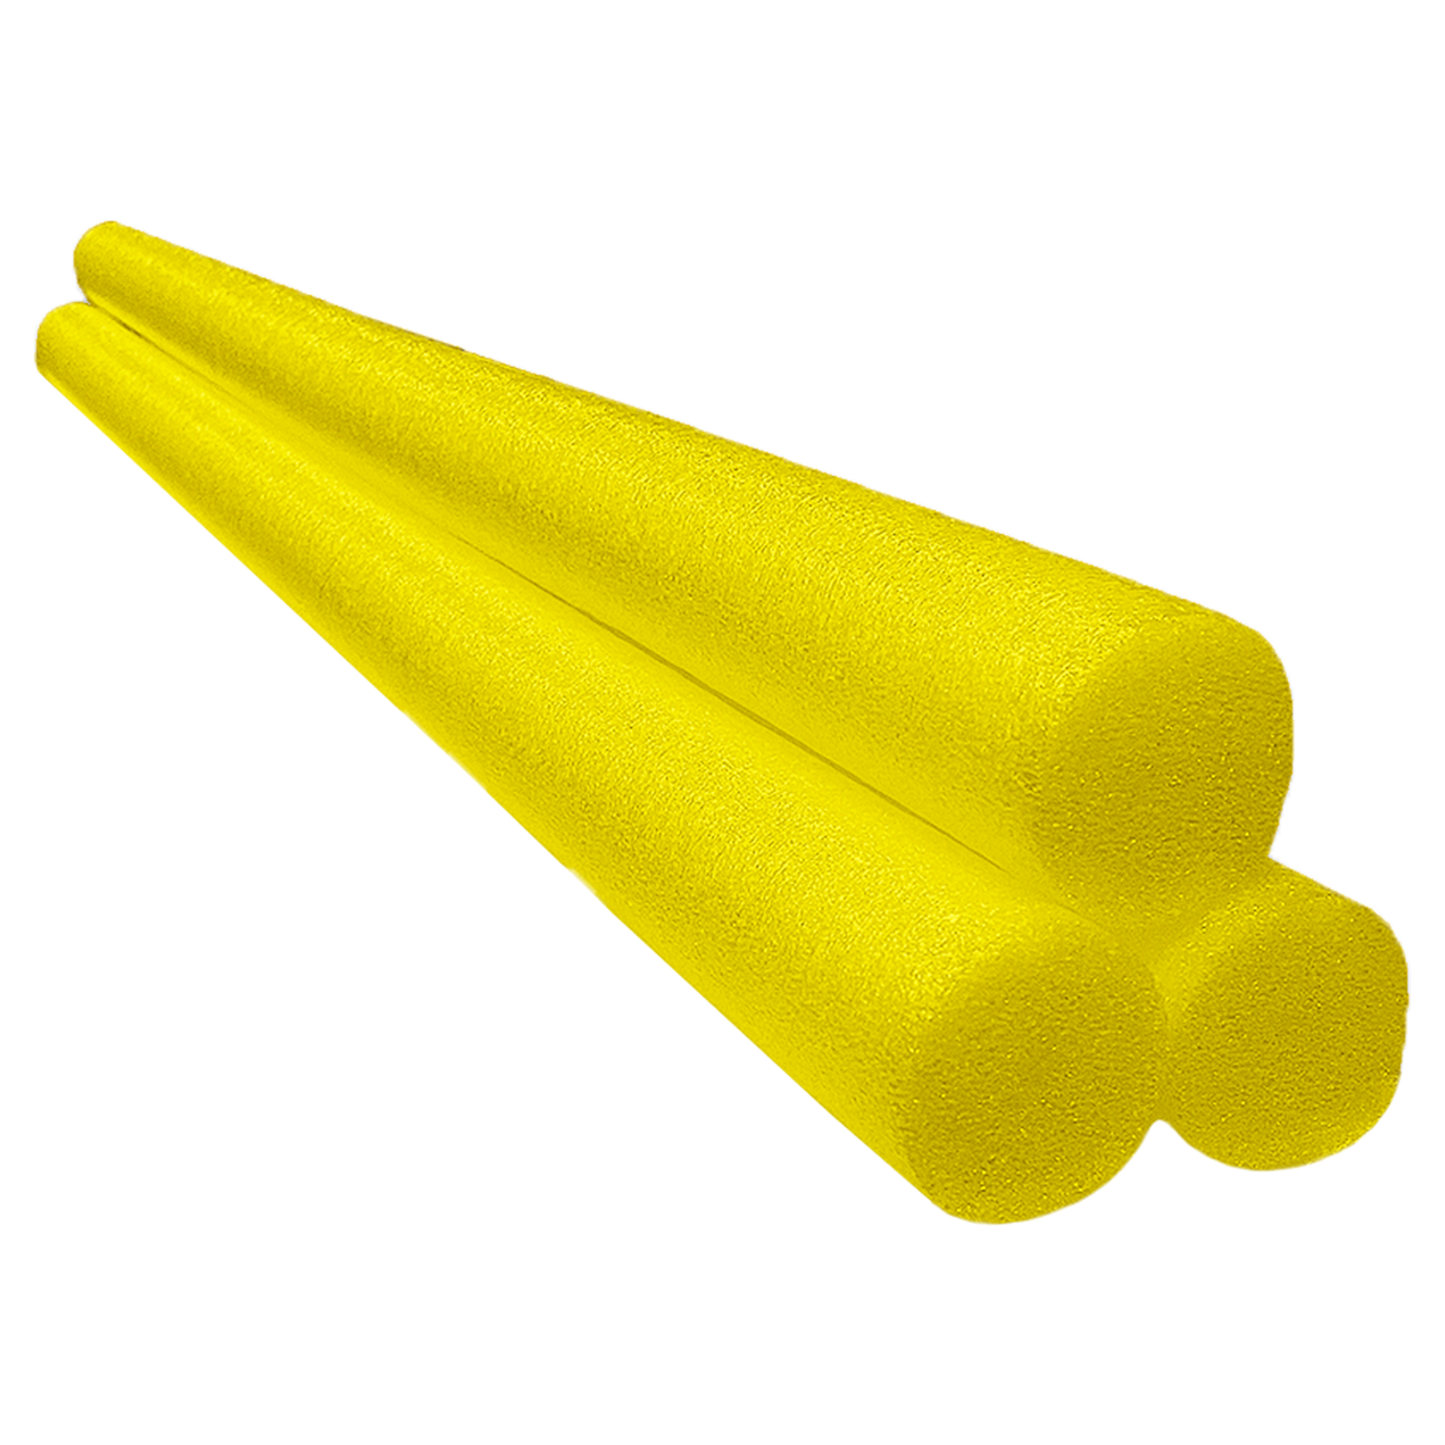 Oodles of Noodles Solid-Core Yellow - 3 Pack